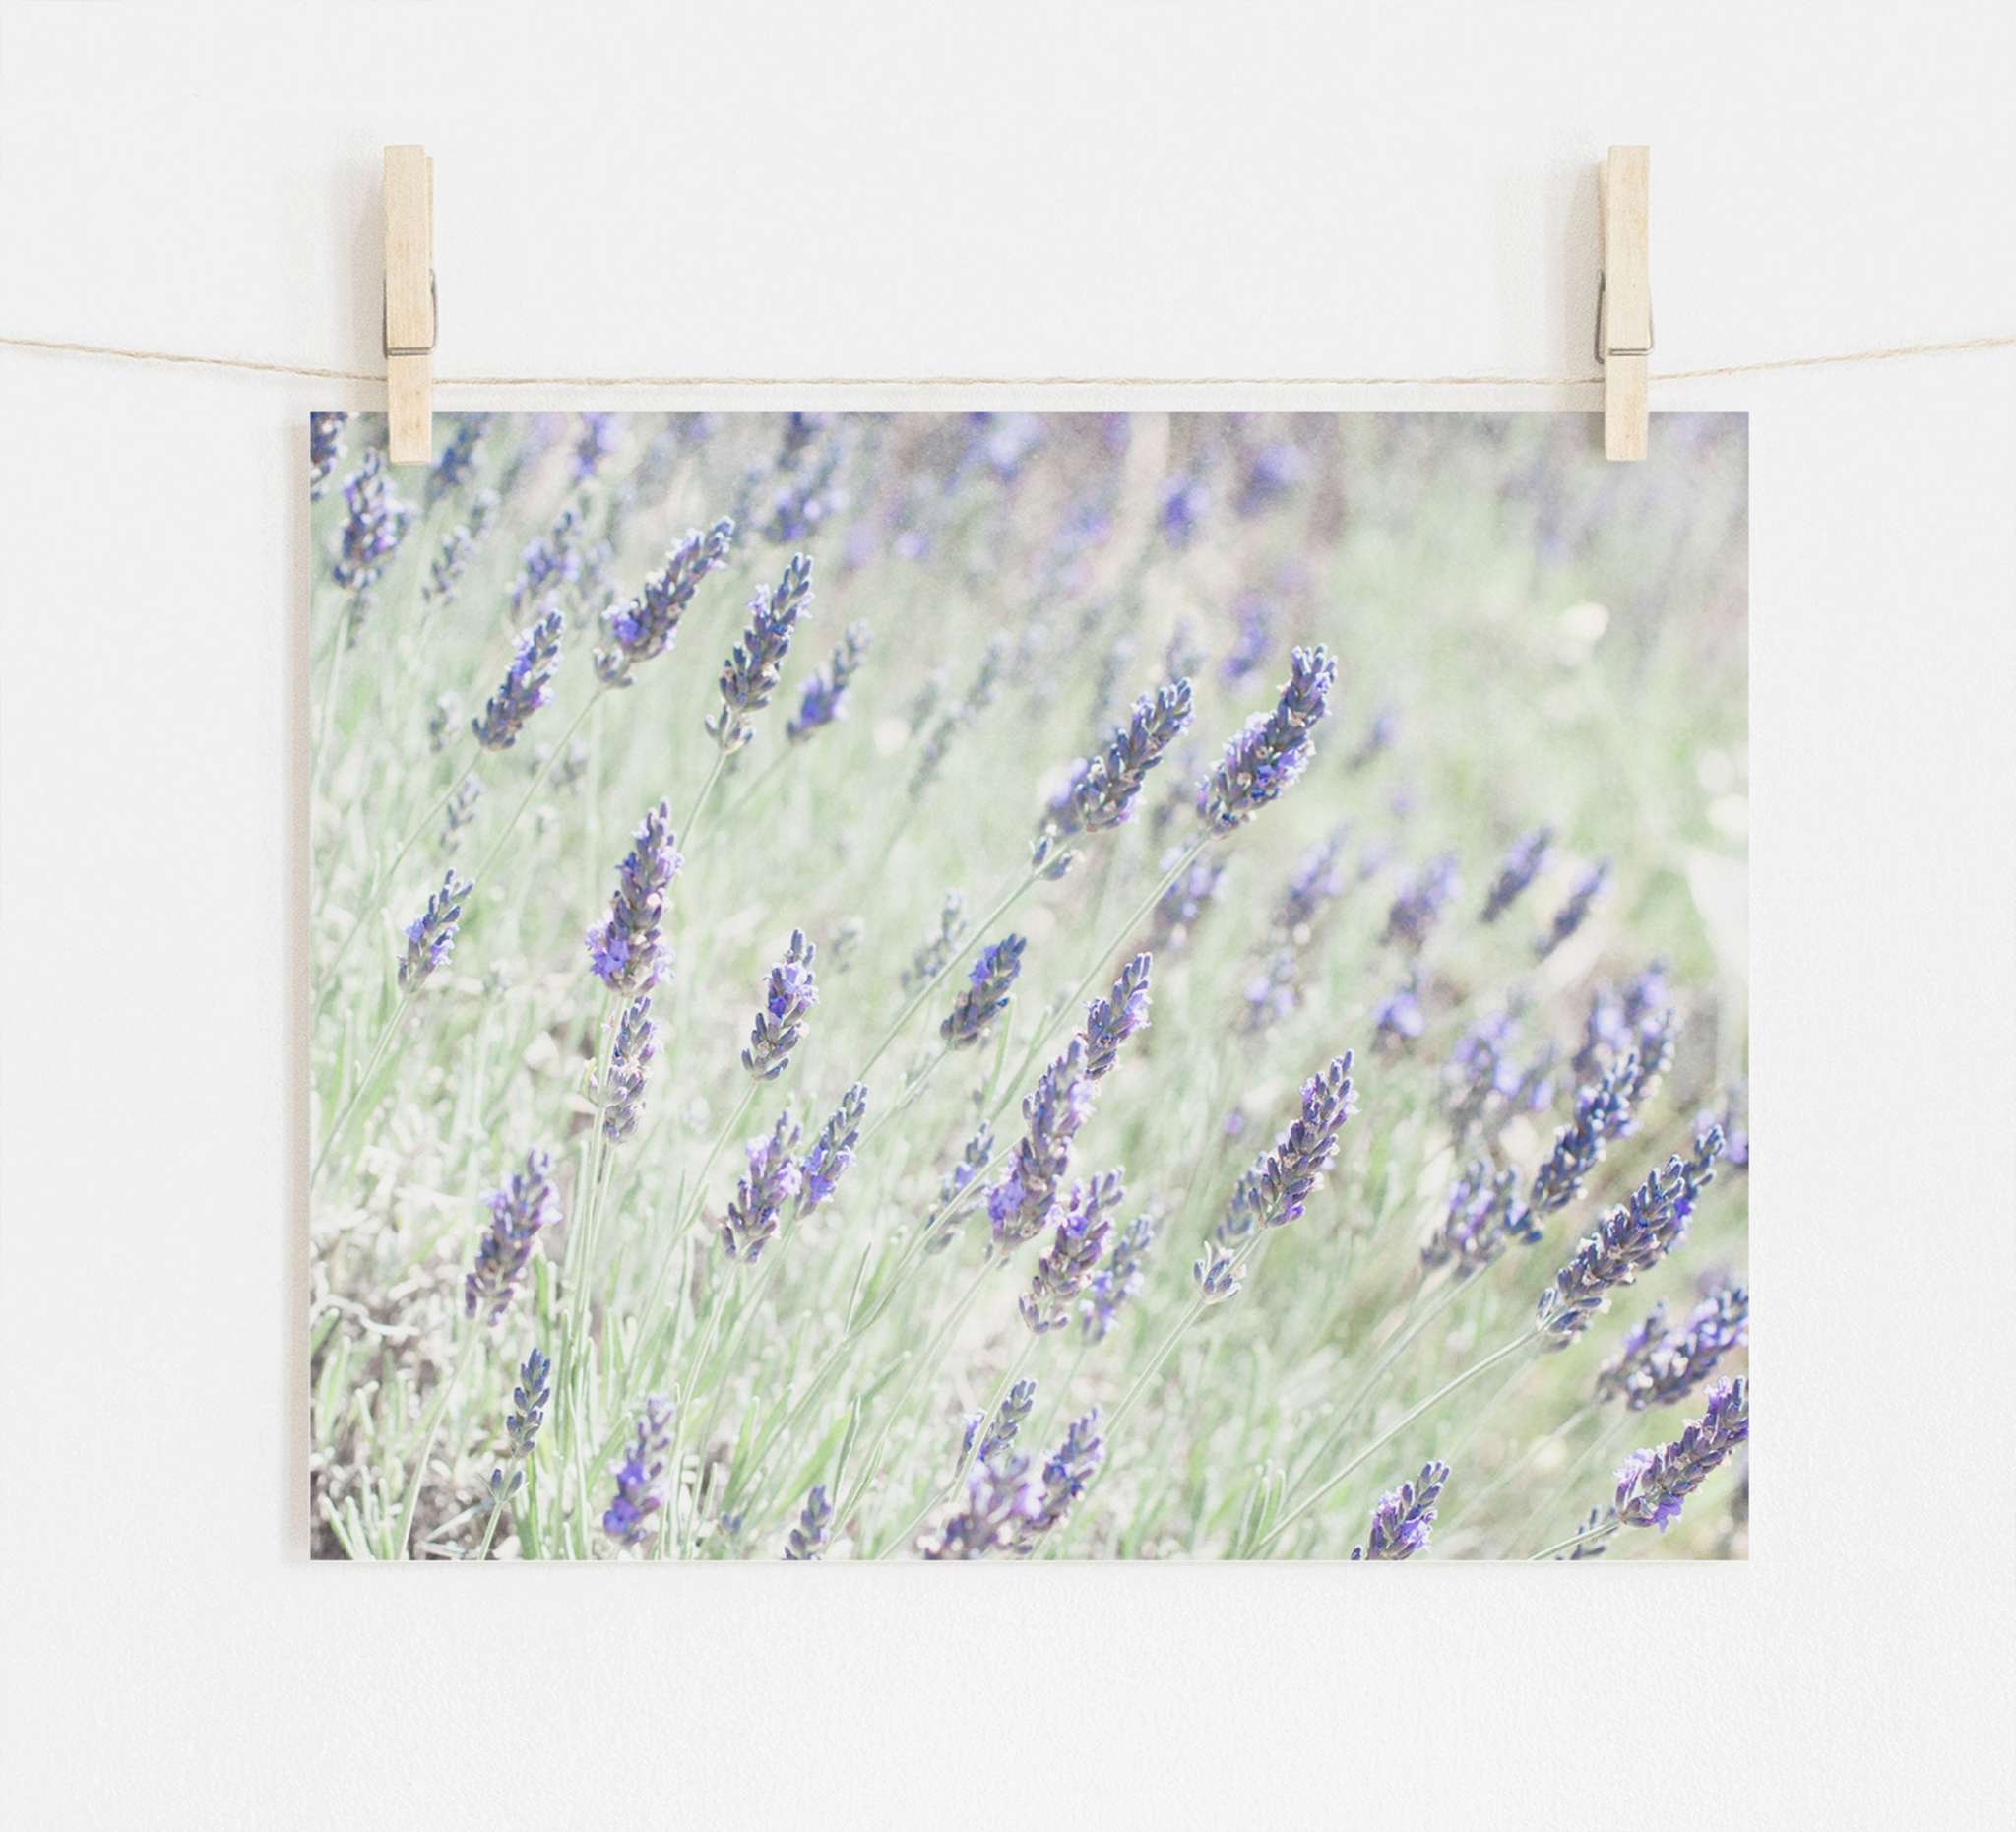 A photograph of a Floral Purple Print, &#39;Lavender for LaLa&#39; printed on archival photographic paper, pinned to a string with wooden clothespins on a plain, bright background by Offley Green.